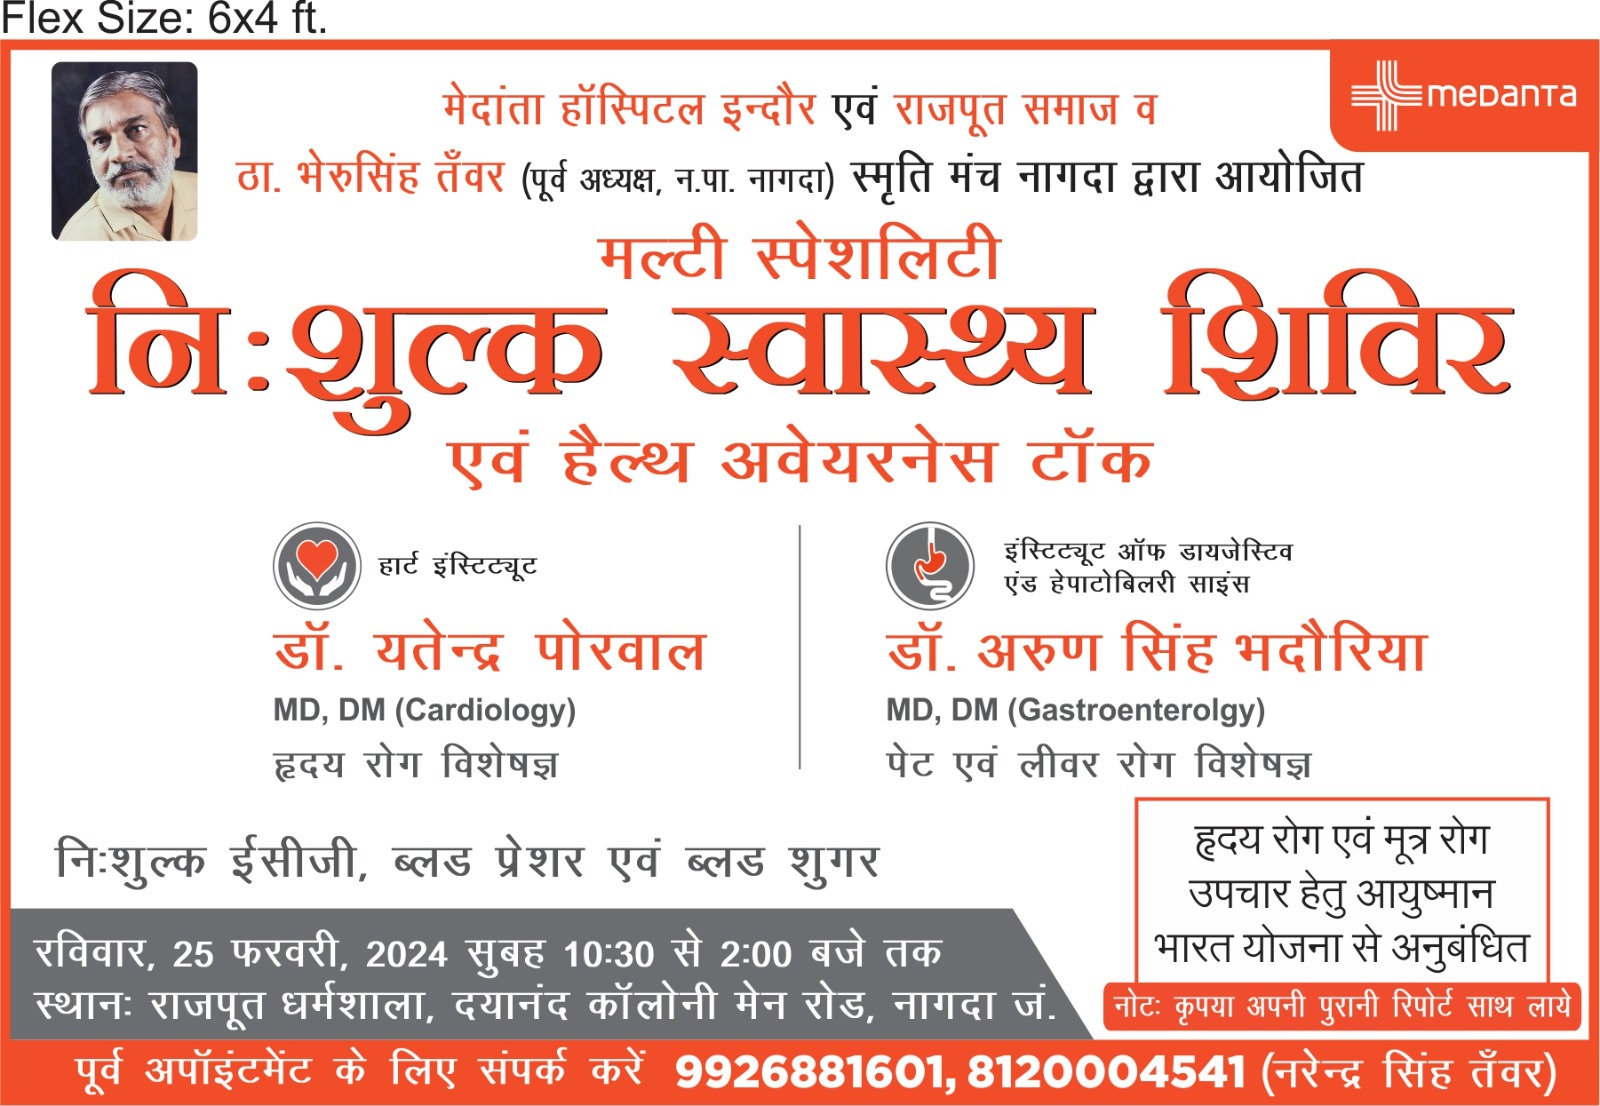 Free Multi-Specialty Health Camp and Health Awareness Talk in Nagda on the 25th